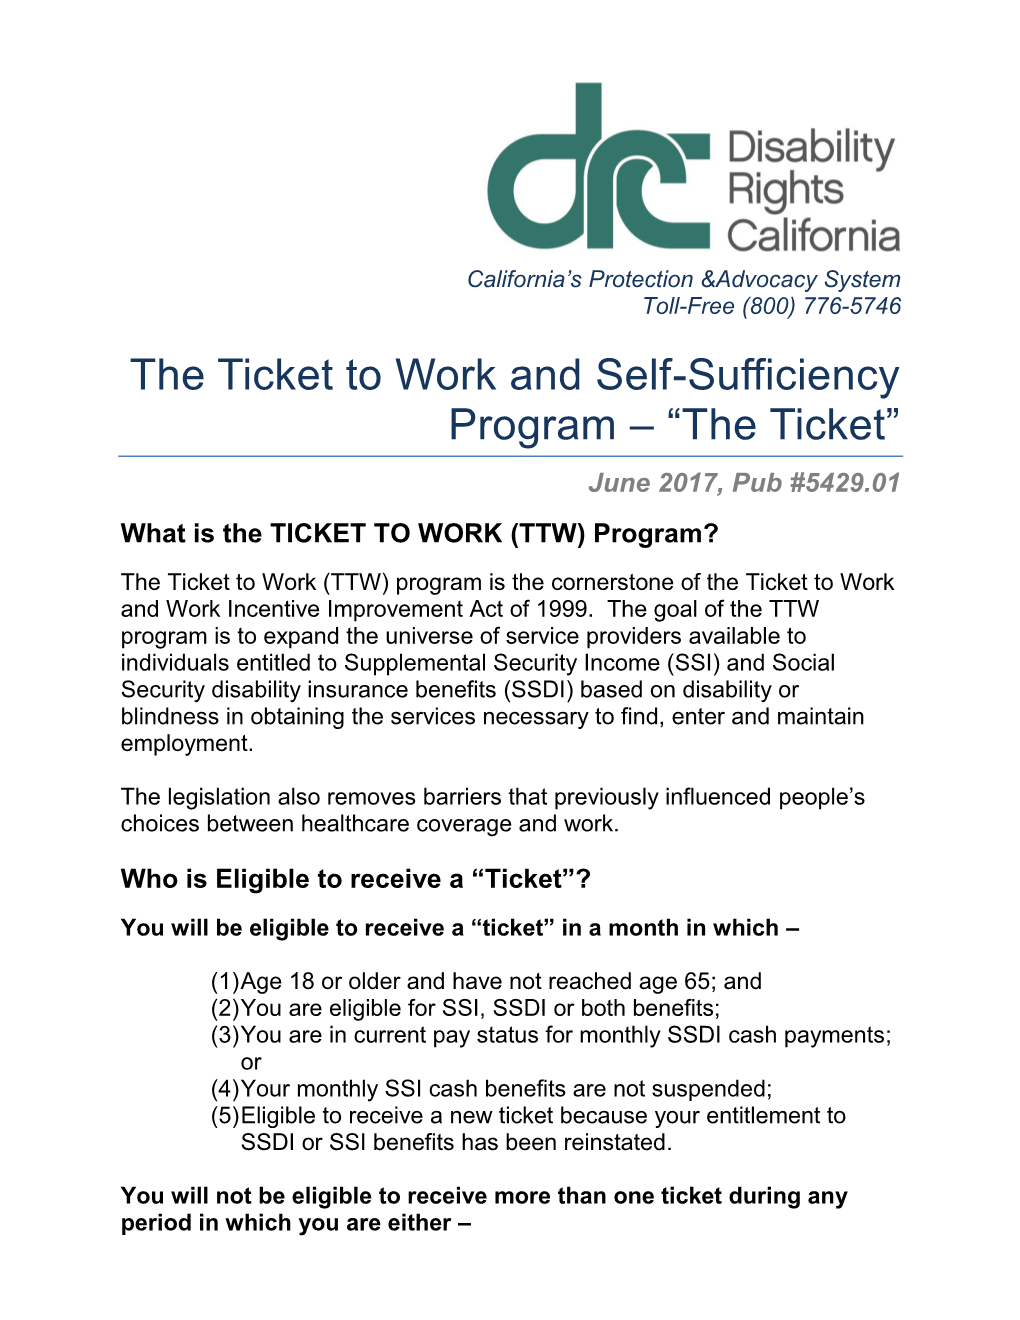 The Ticket to Work and Self-Sufficiency Program – “The Ticket” June 2017, Pub #5429.01 What Is the TICKET to WORK (TTW) Program?